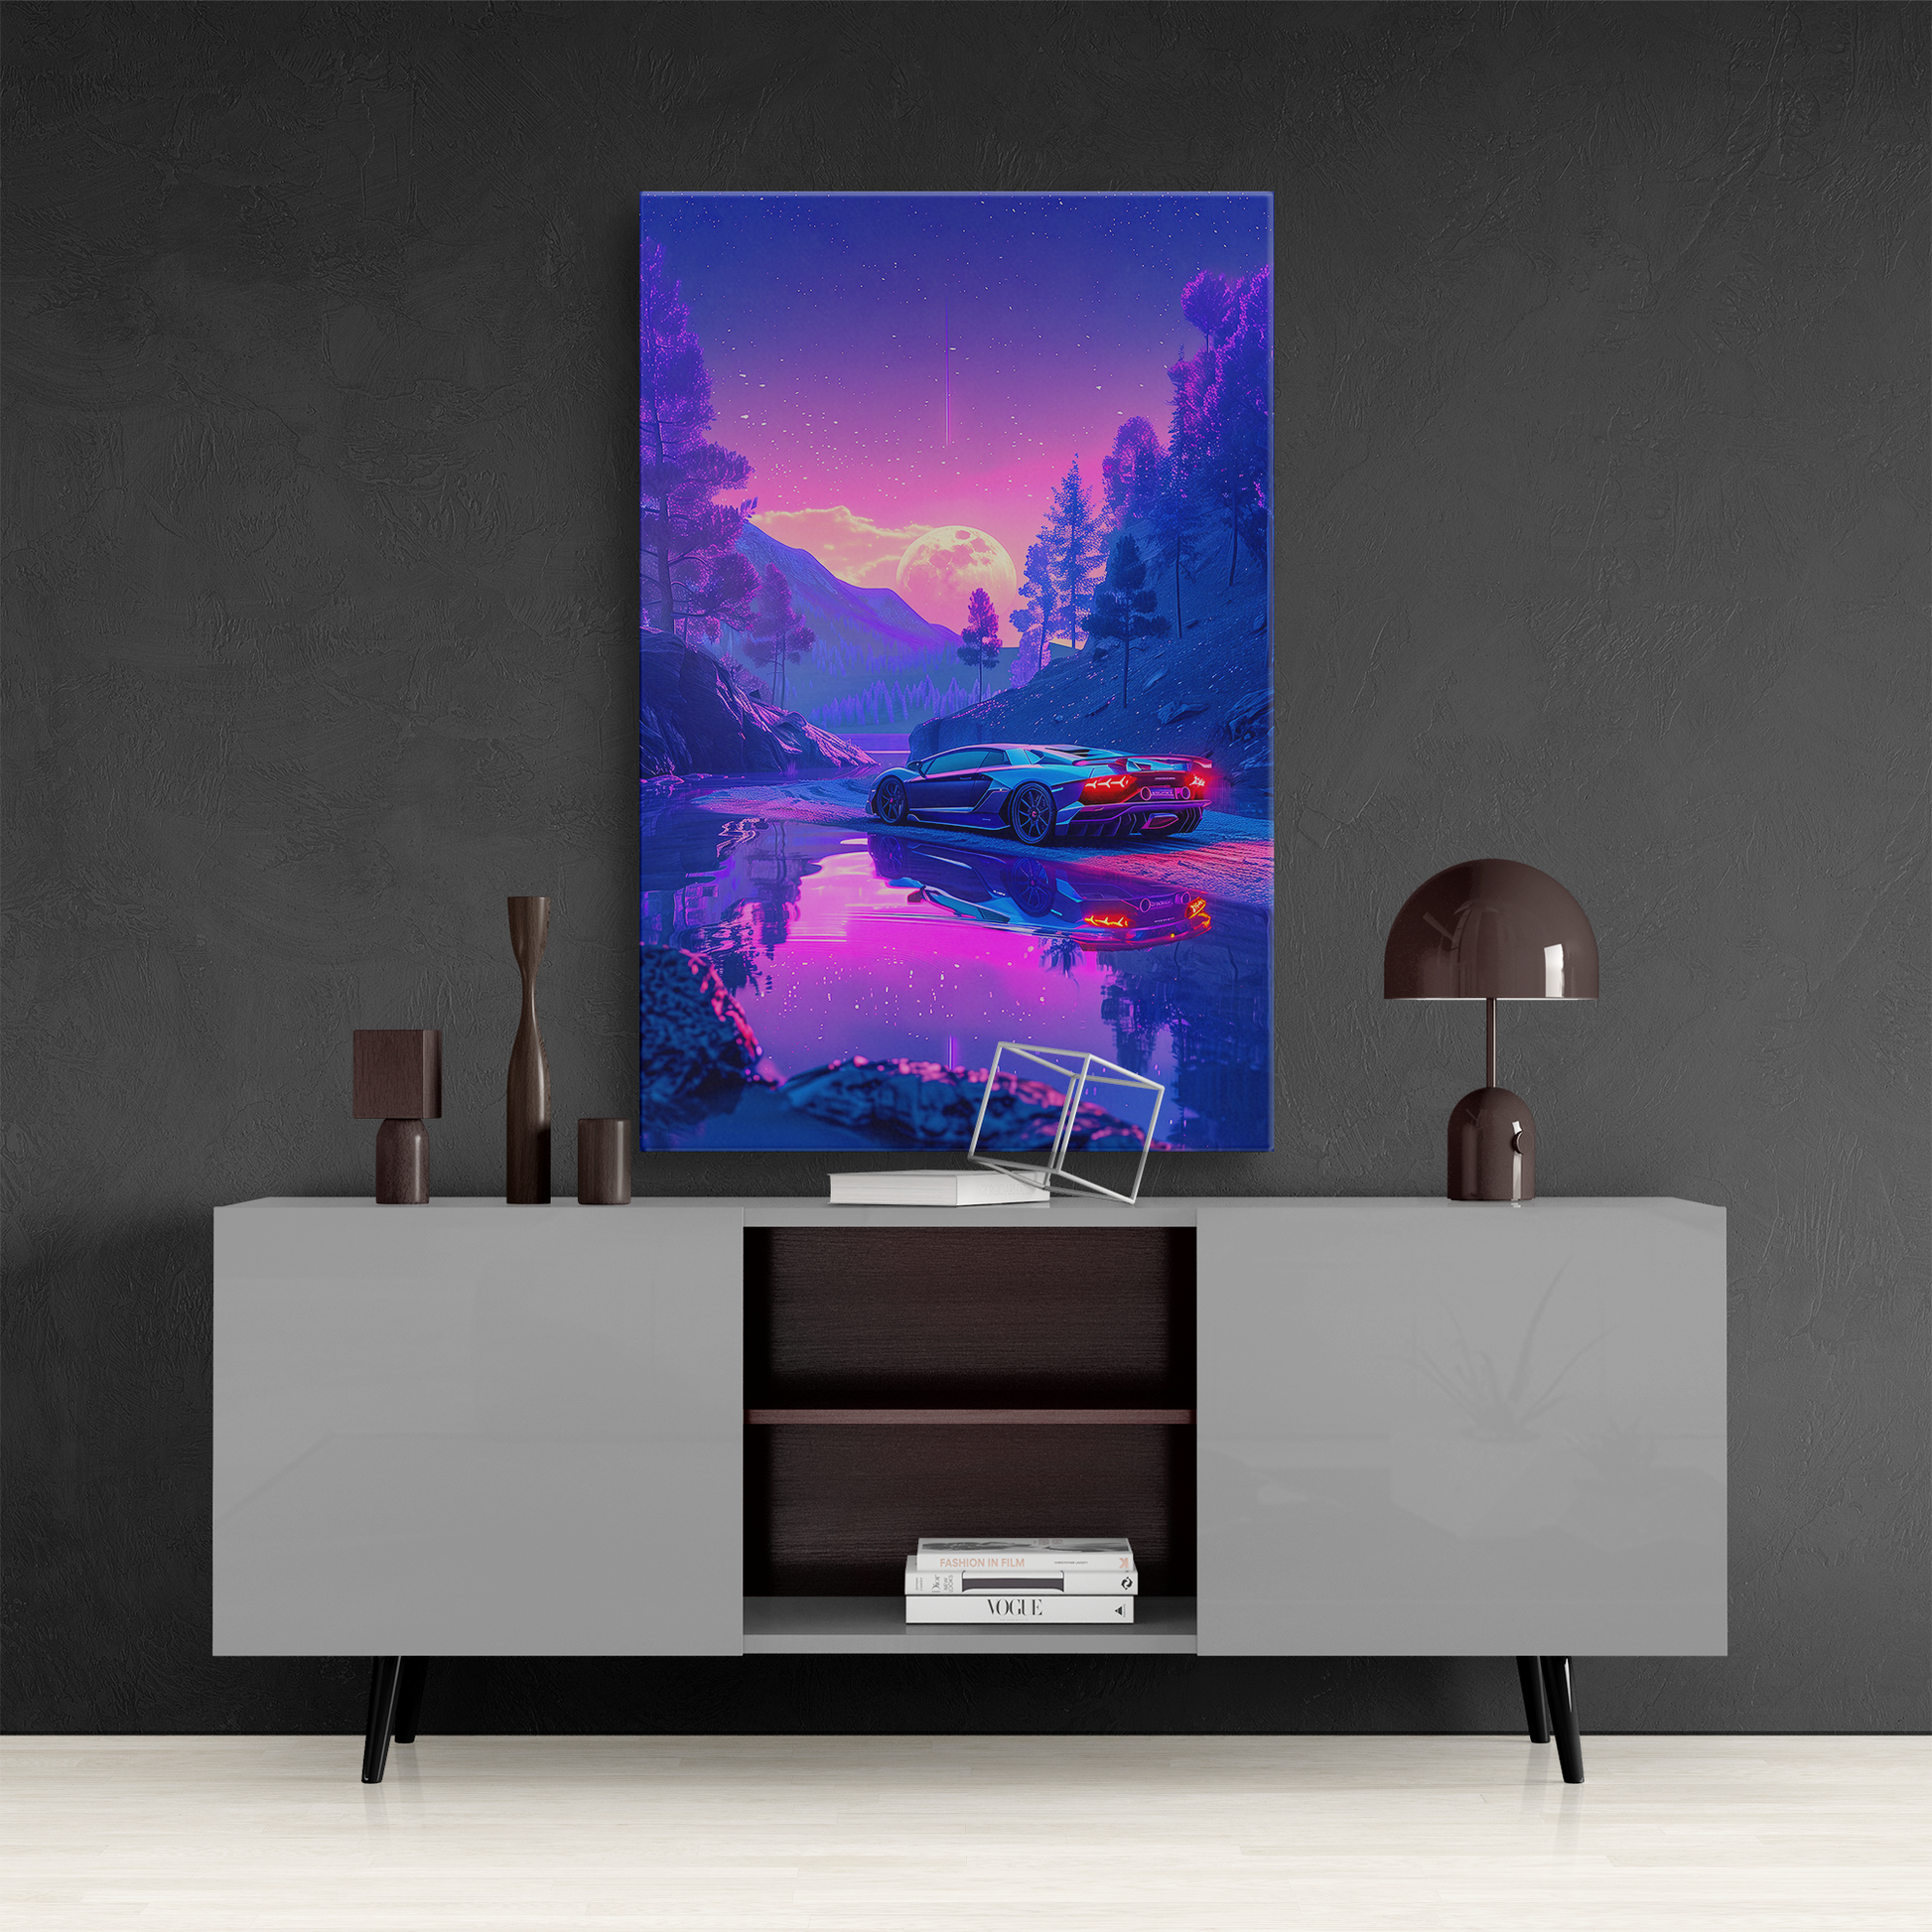 Twilight Reflections (Canvas)Transform your living space with our modern home decor. From minimalist to boho chic, find pieces that reflect your style. Shop todayRimaGallery